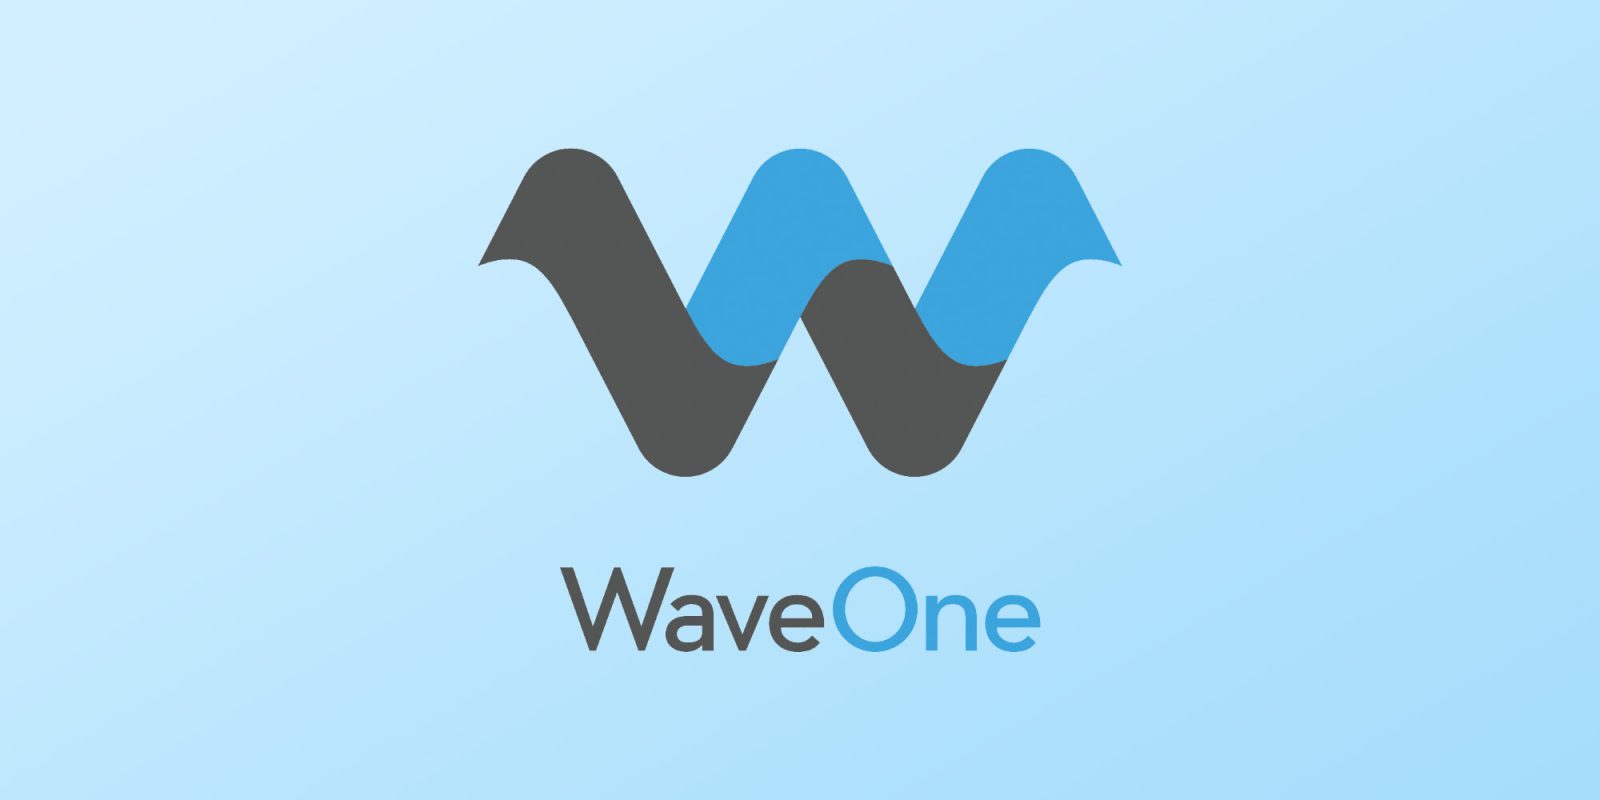 Apple bolsters its AI technology with acquisition of WaveOne startup